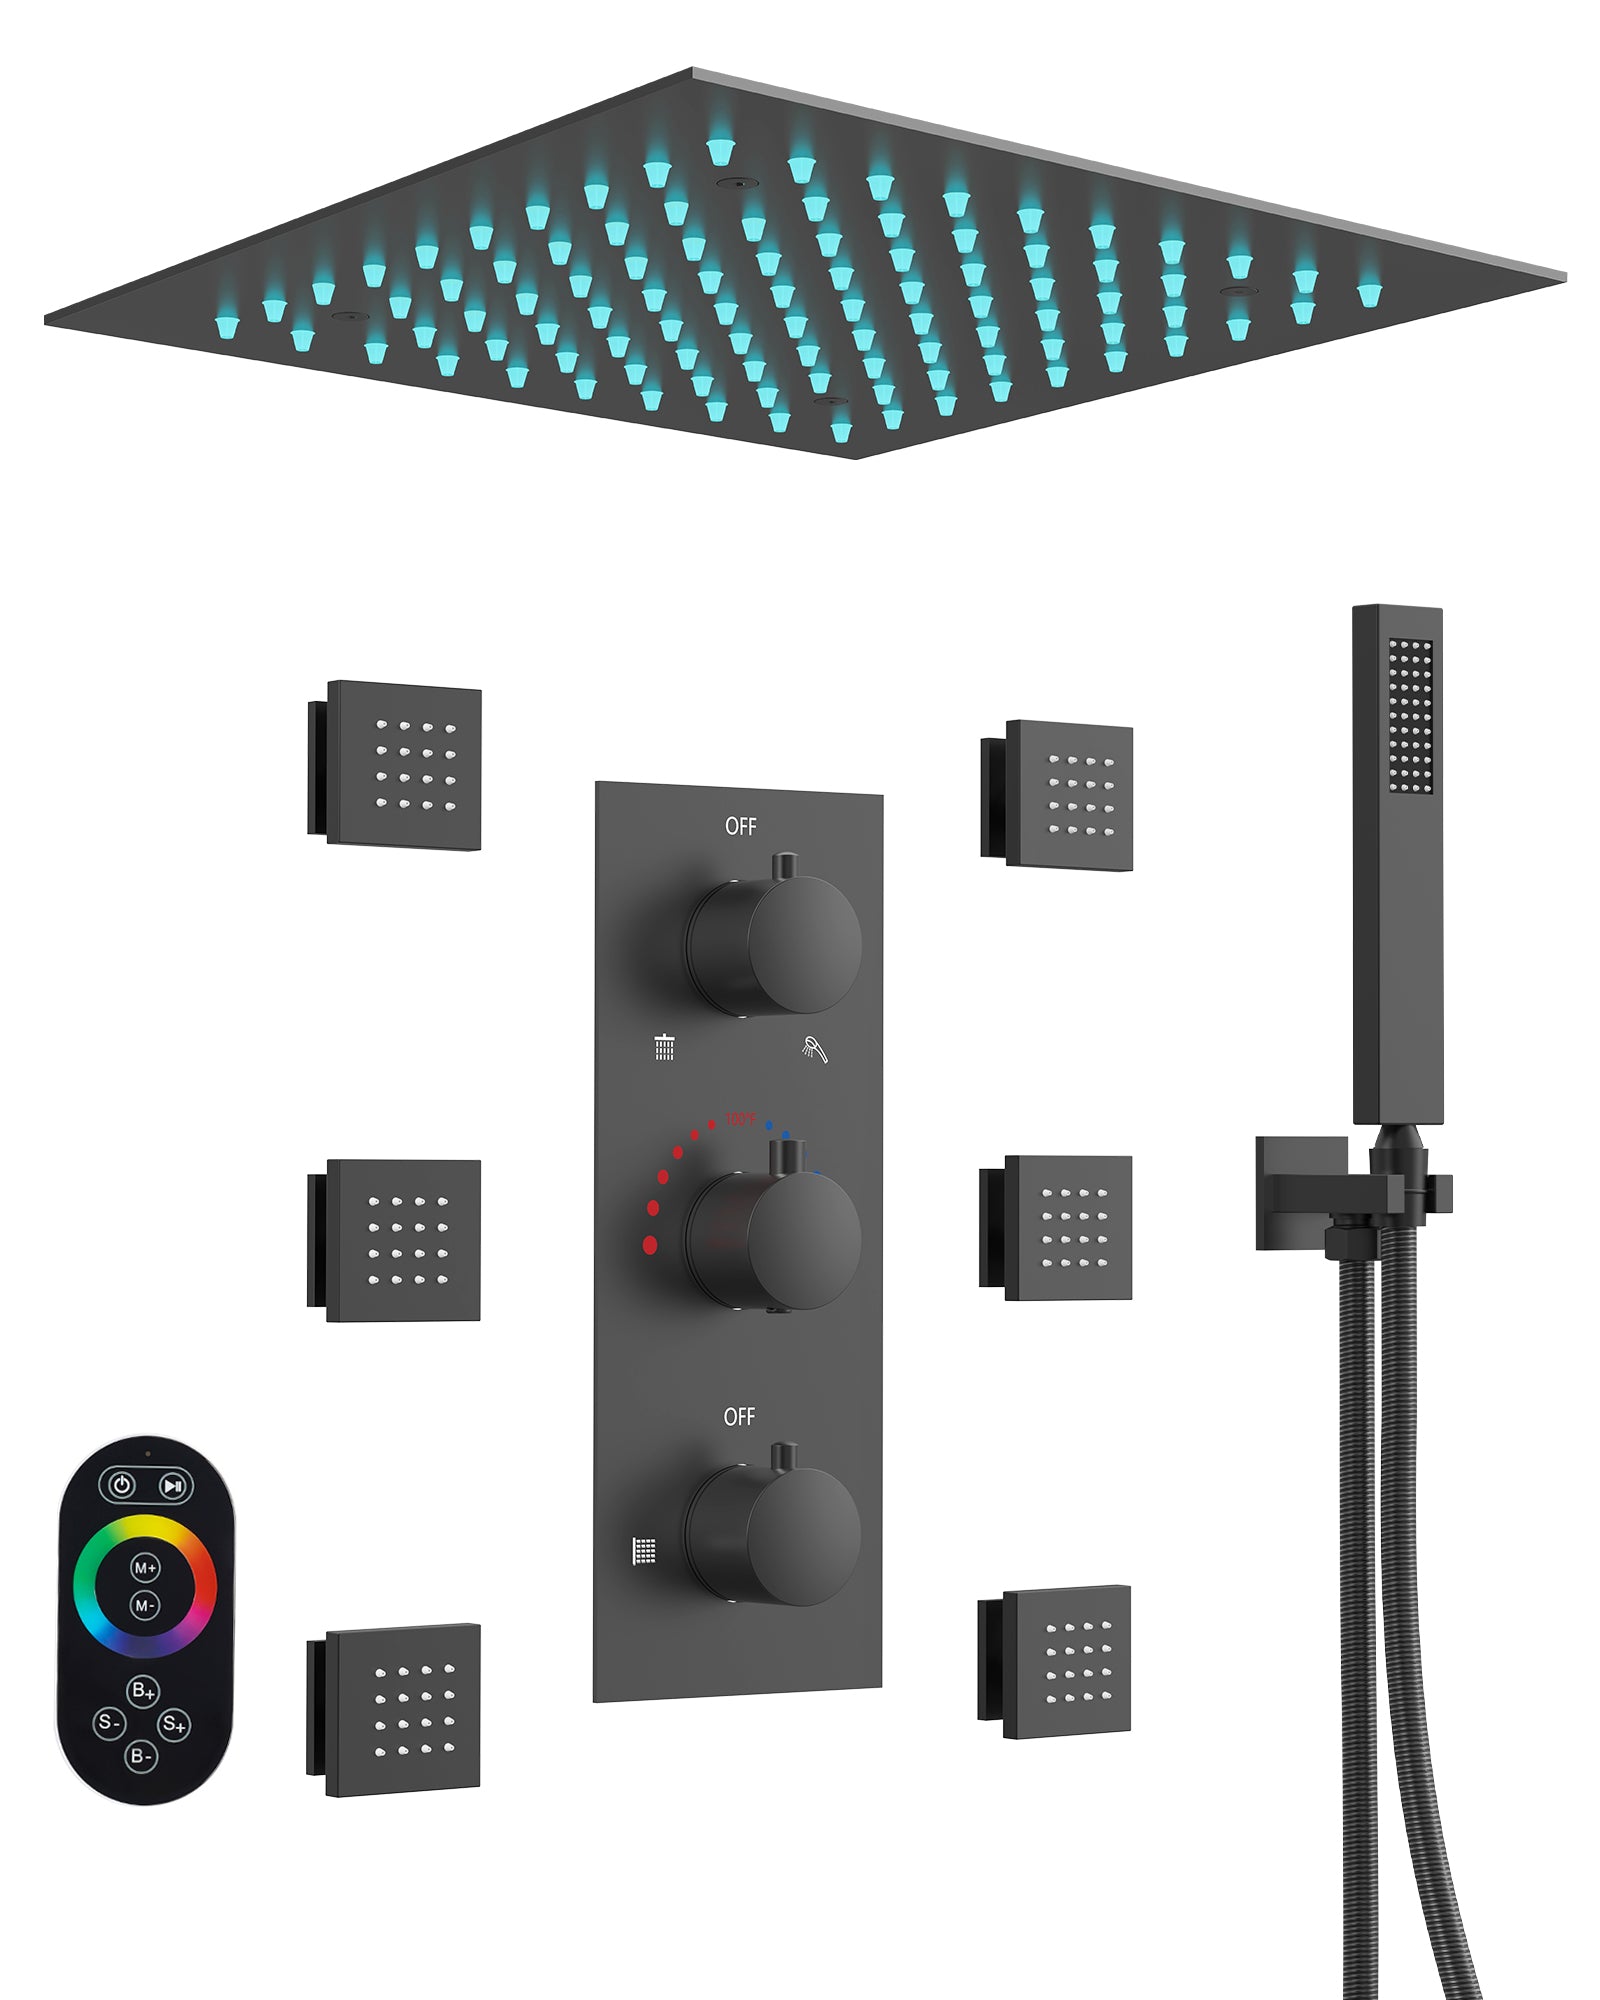 EVERSTEIN Matte Black Luxury Shower System with LED Color Changing Rain Head - 12" Ceiling Rainfall, Handheld & Body Massage Jets